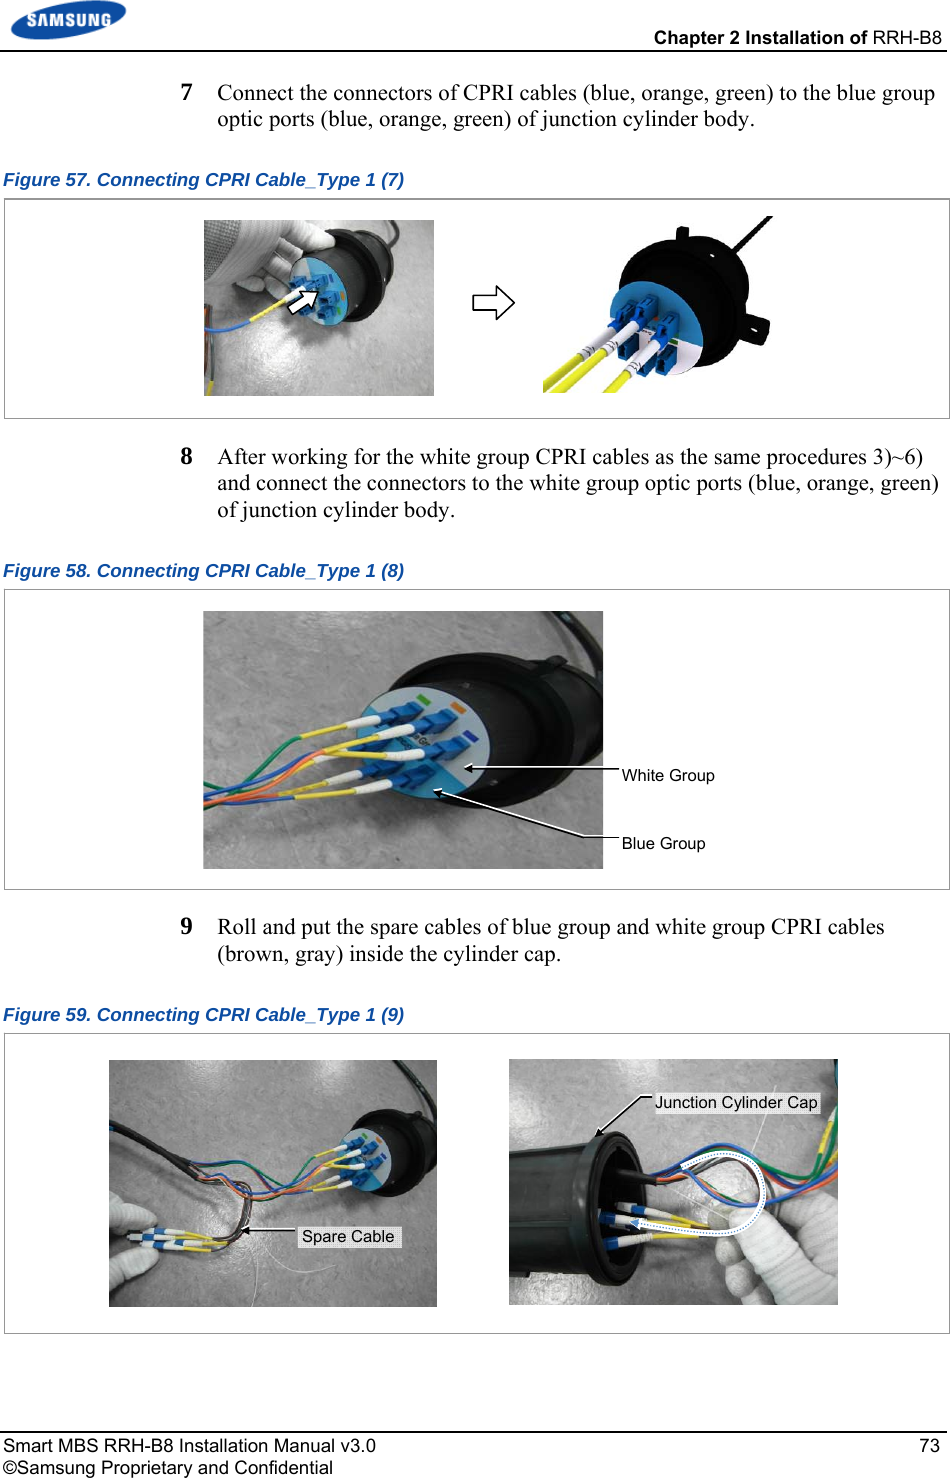  Chapter 2 Installation of RRH-B8 Smart MBS RRH-B8 Installation Manual v3.0   73 ©Samsung Proprietary and Confidential 7  Connect the connectors of CPRI cables (blue, orange, green) to the blue group optic ports (blue, orange, green) of junction cylinder body. Figure 57. Connecting CPRI Cable_Type 1 (7)  8  After working for the white group CPRI cables as the same procedures 3)~6) and connect the connectors to the white group optic ports (blue, orange, green) of junction cylinder body. Figure 58. Connecting CPRI Cable_Type 1 (8)  9  Roll and put the spare cables of blue group and white group CPRI cables (brown, gray) inside the cylinder cap. Figure 59. Connecting CPRI Cable_Type 1 (9)  CPRI Cable(Blue Group) Junction Cylinder Cap  Spare CableBlue GroupWhite Group